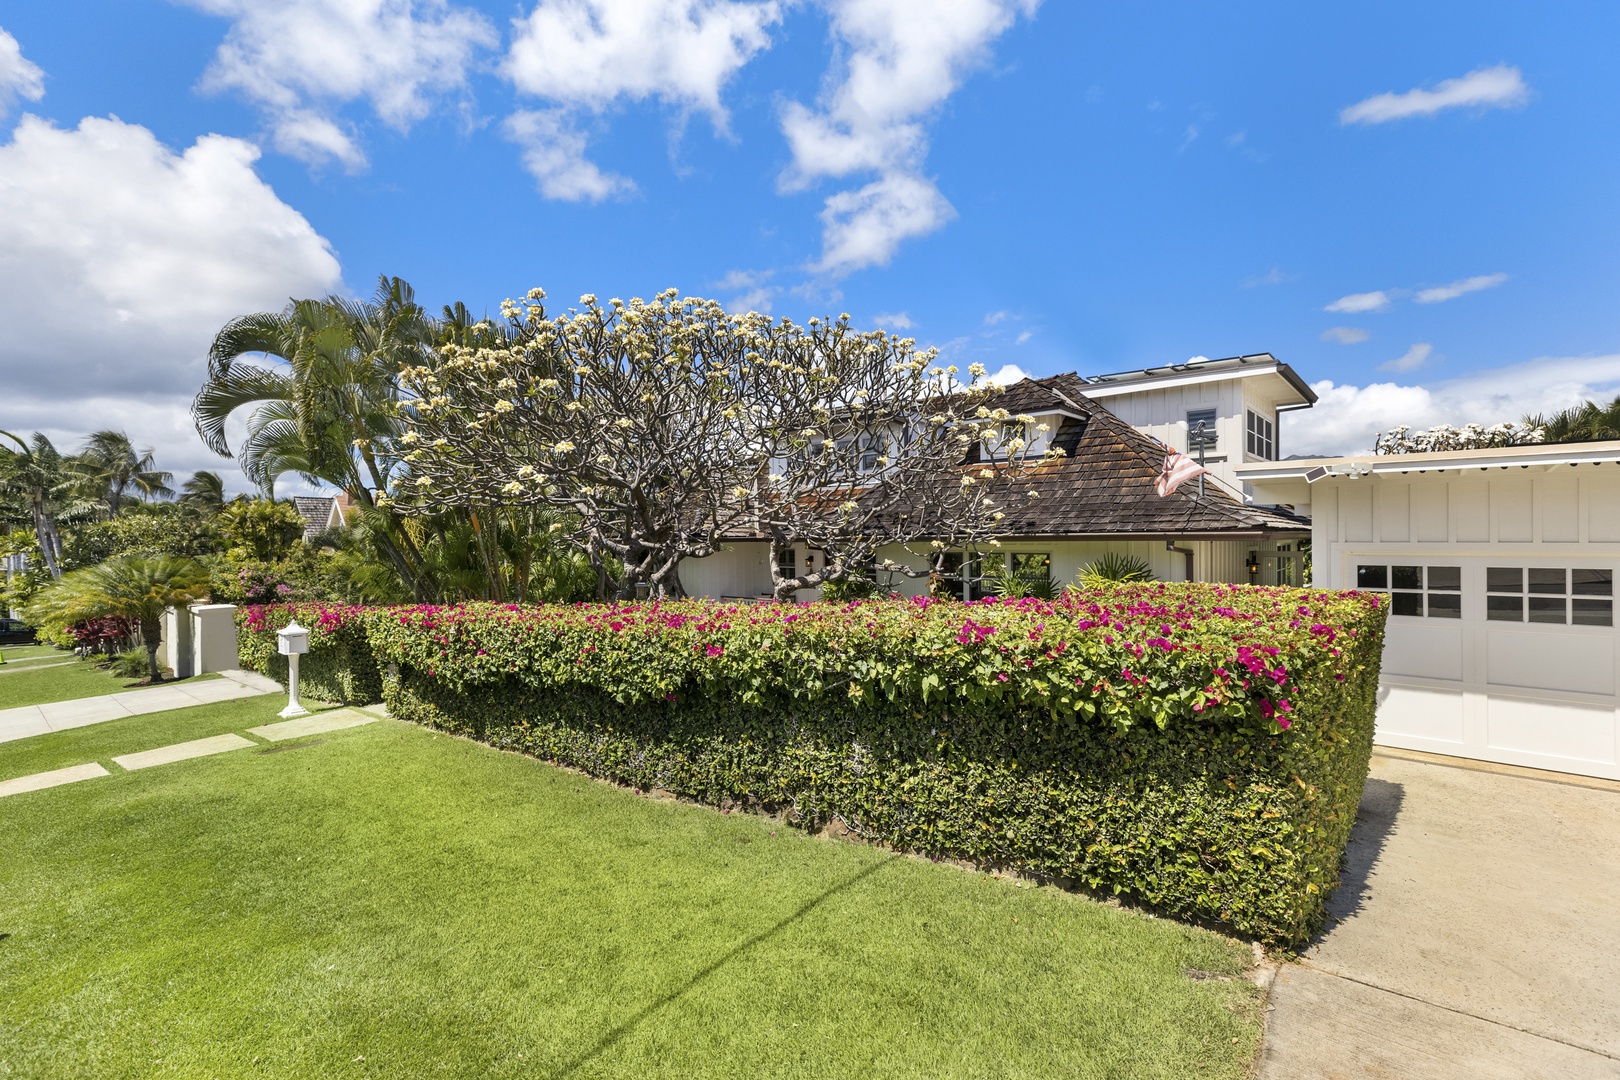 Honolulu Vacation Rentals, Hale Le'ahi* - Gardens give you privacy